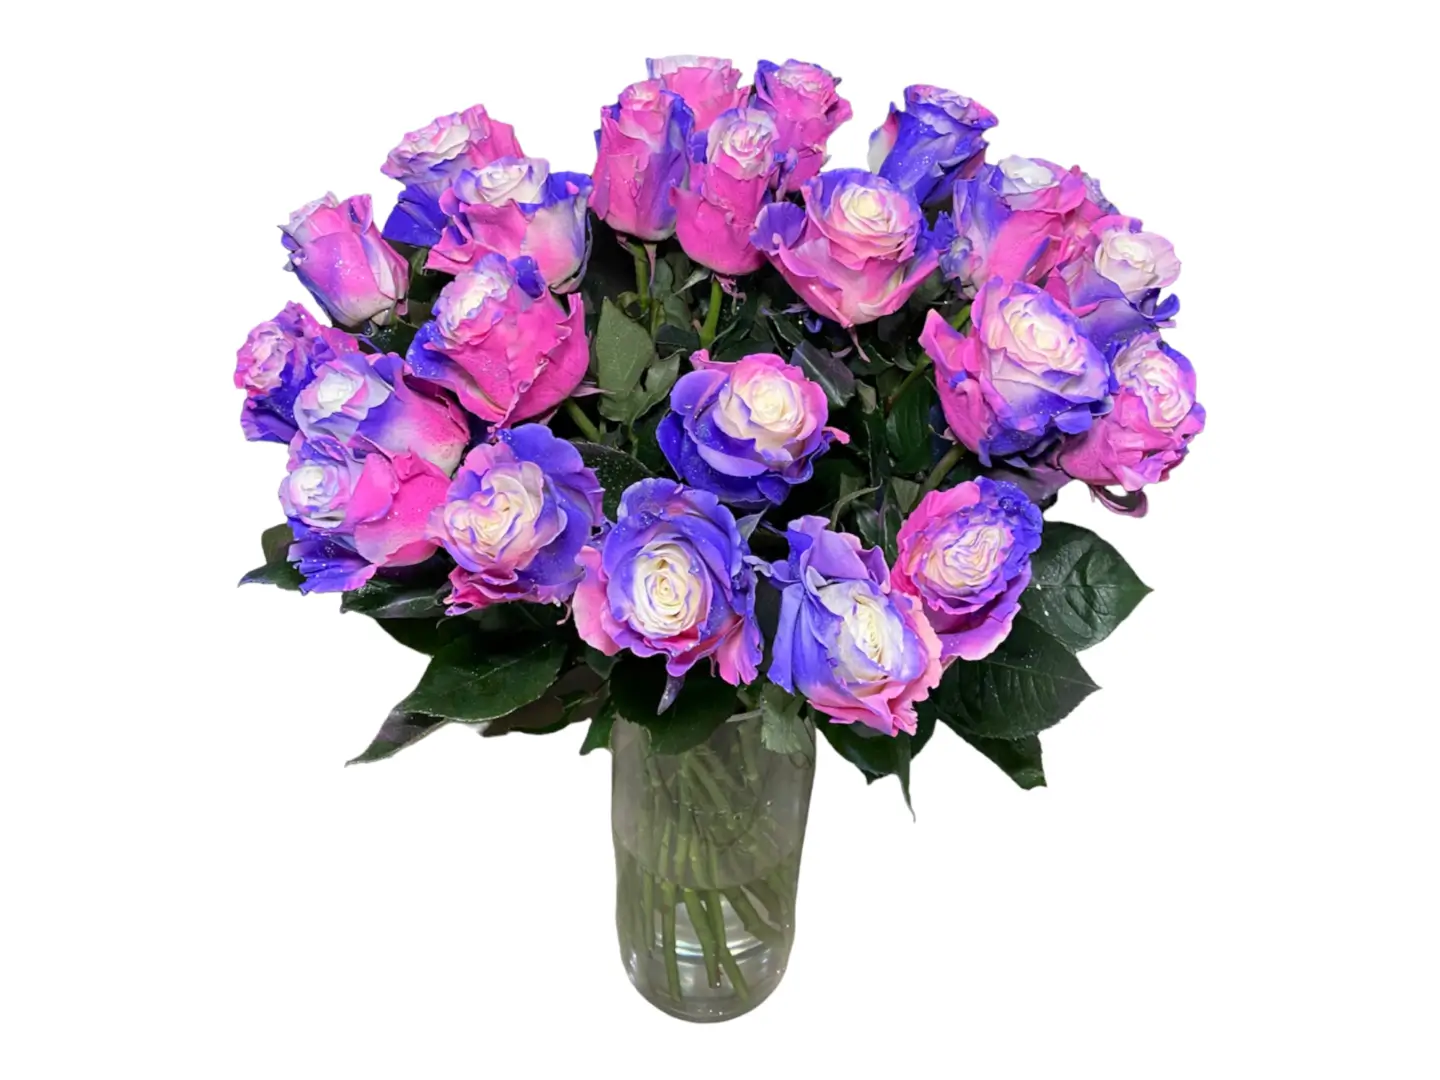 24 payasitos roses in a vase with green leaves